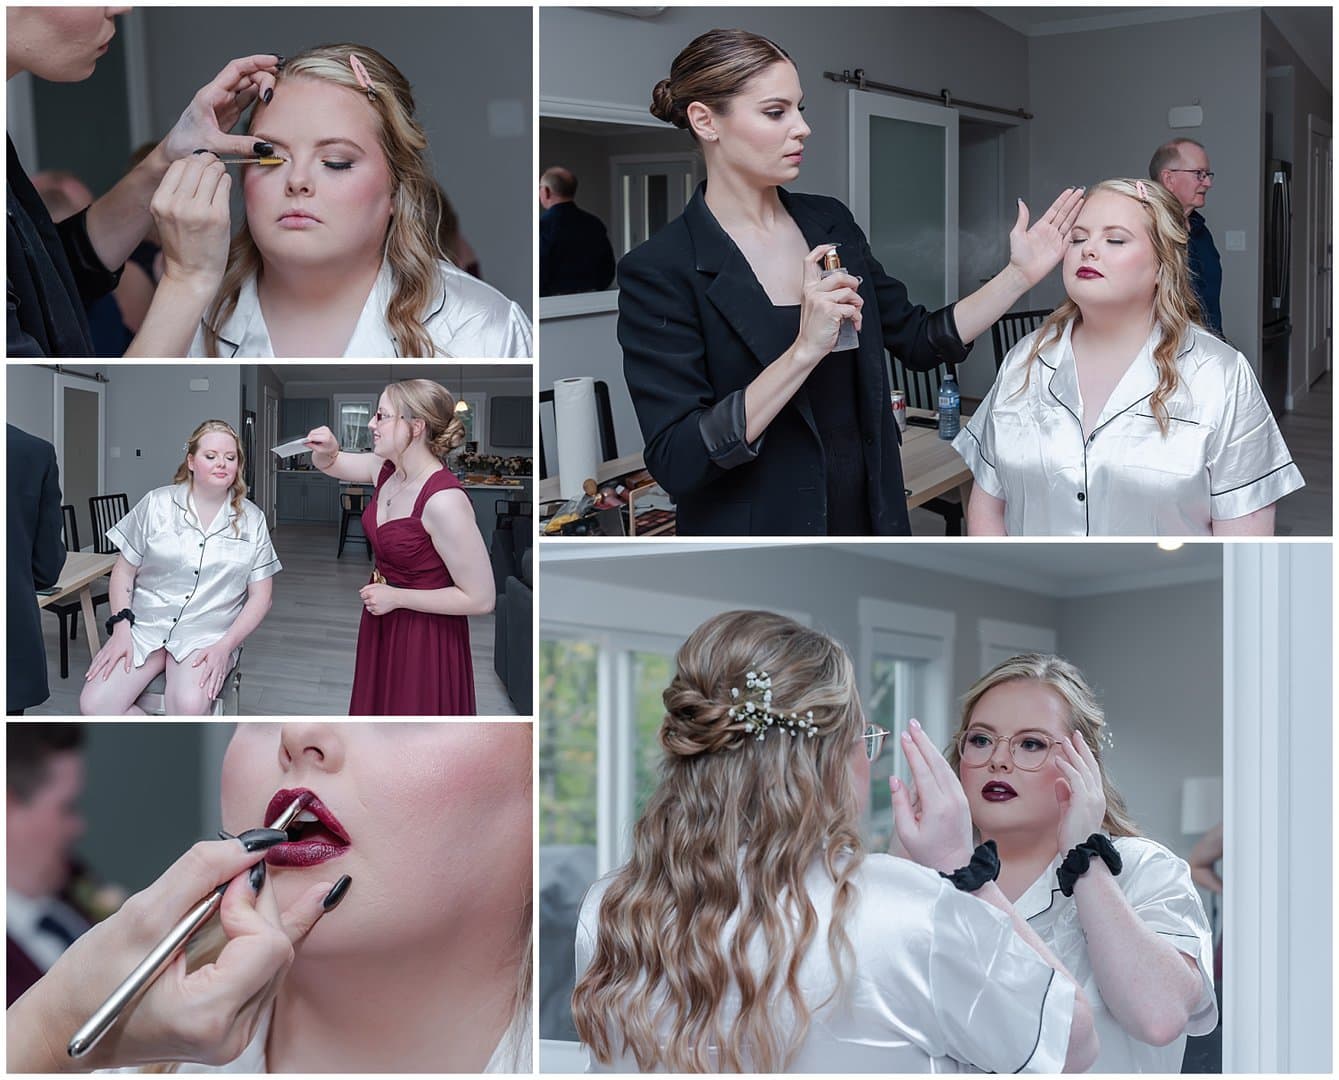 The bride has her makeup put in place while getting ready for her wedding day.